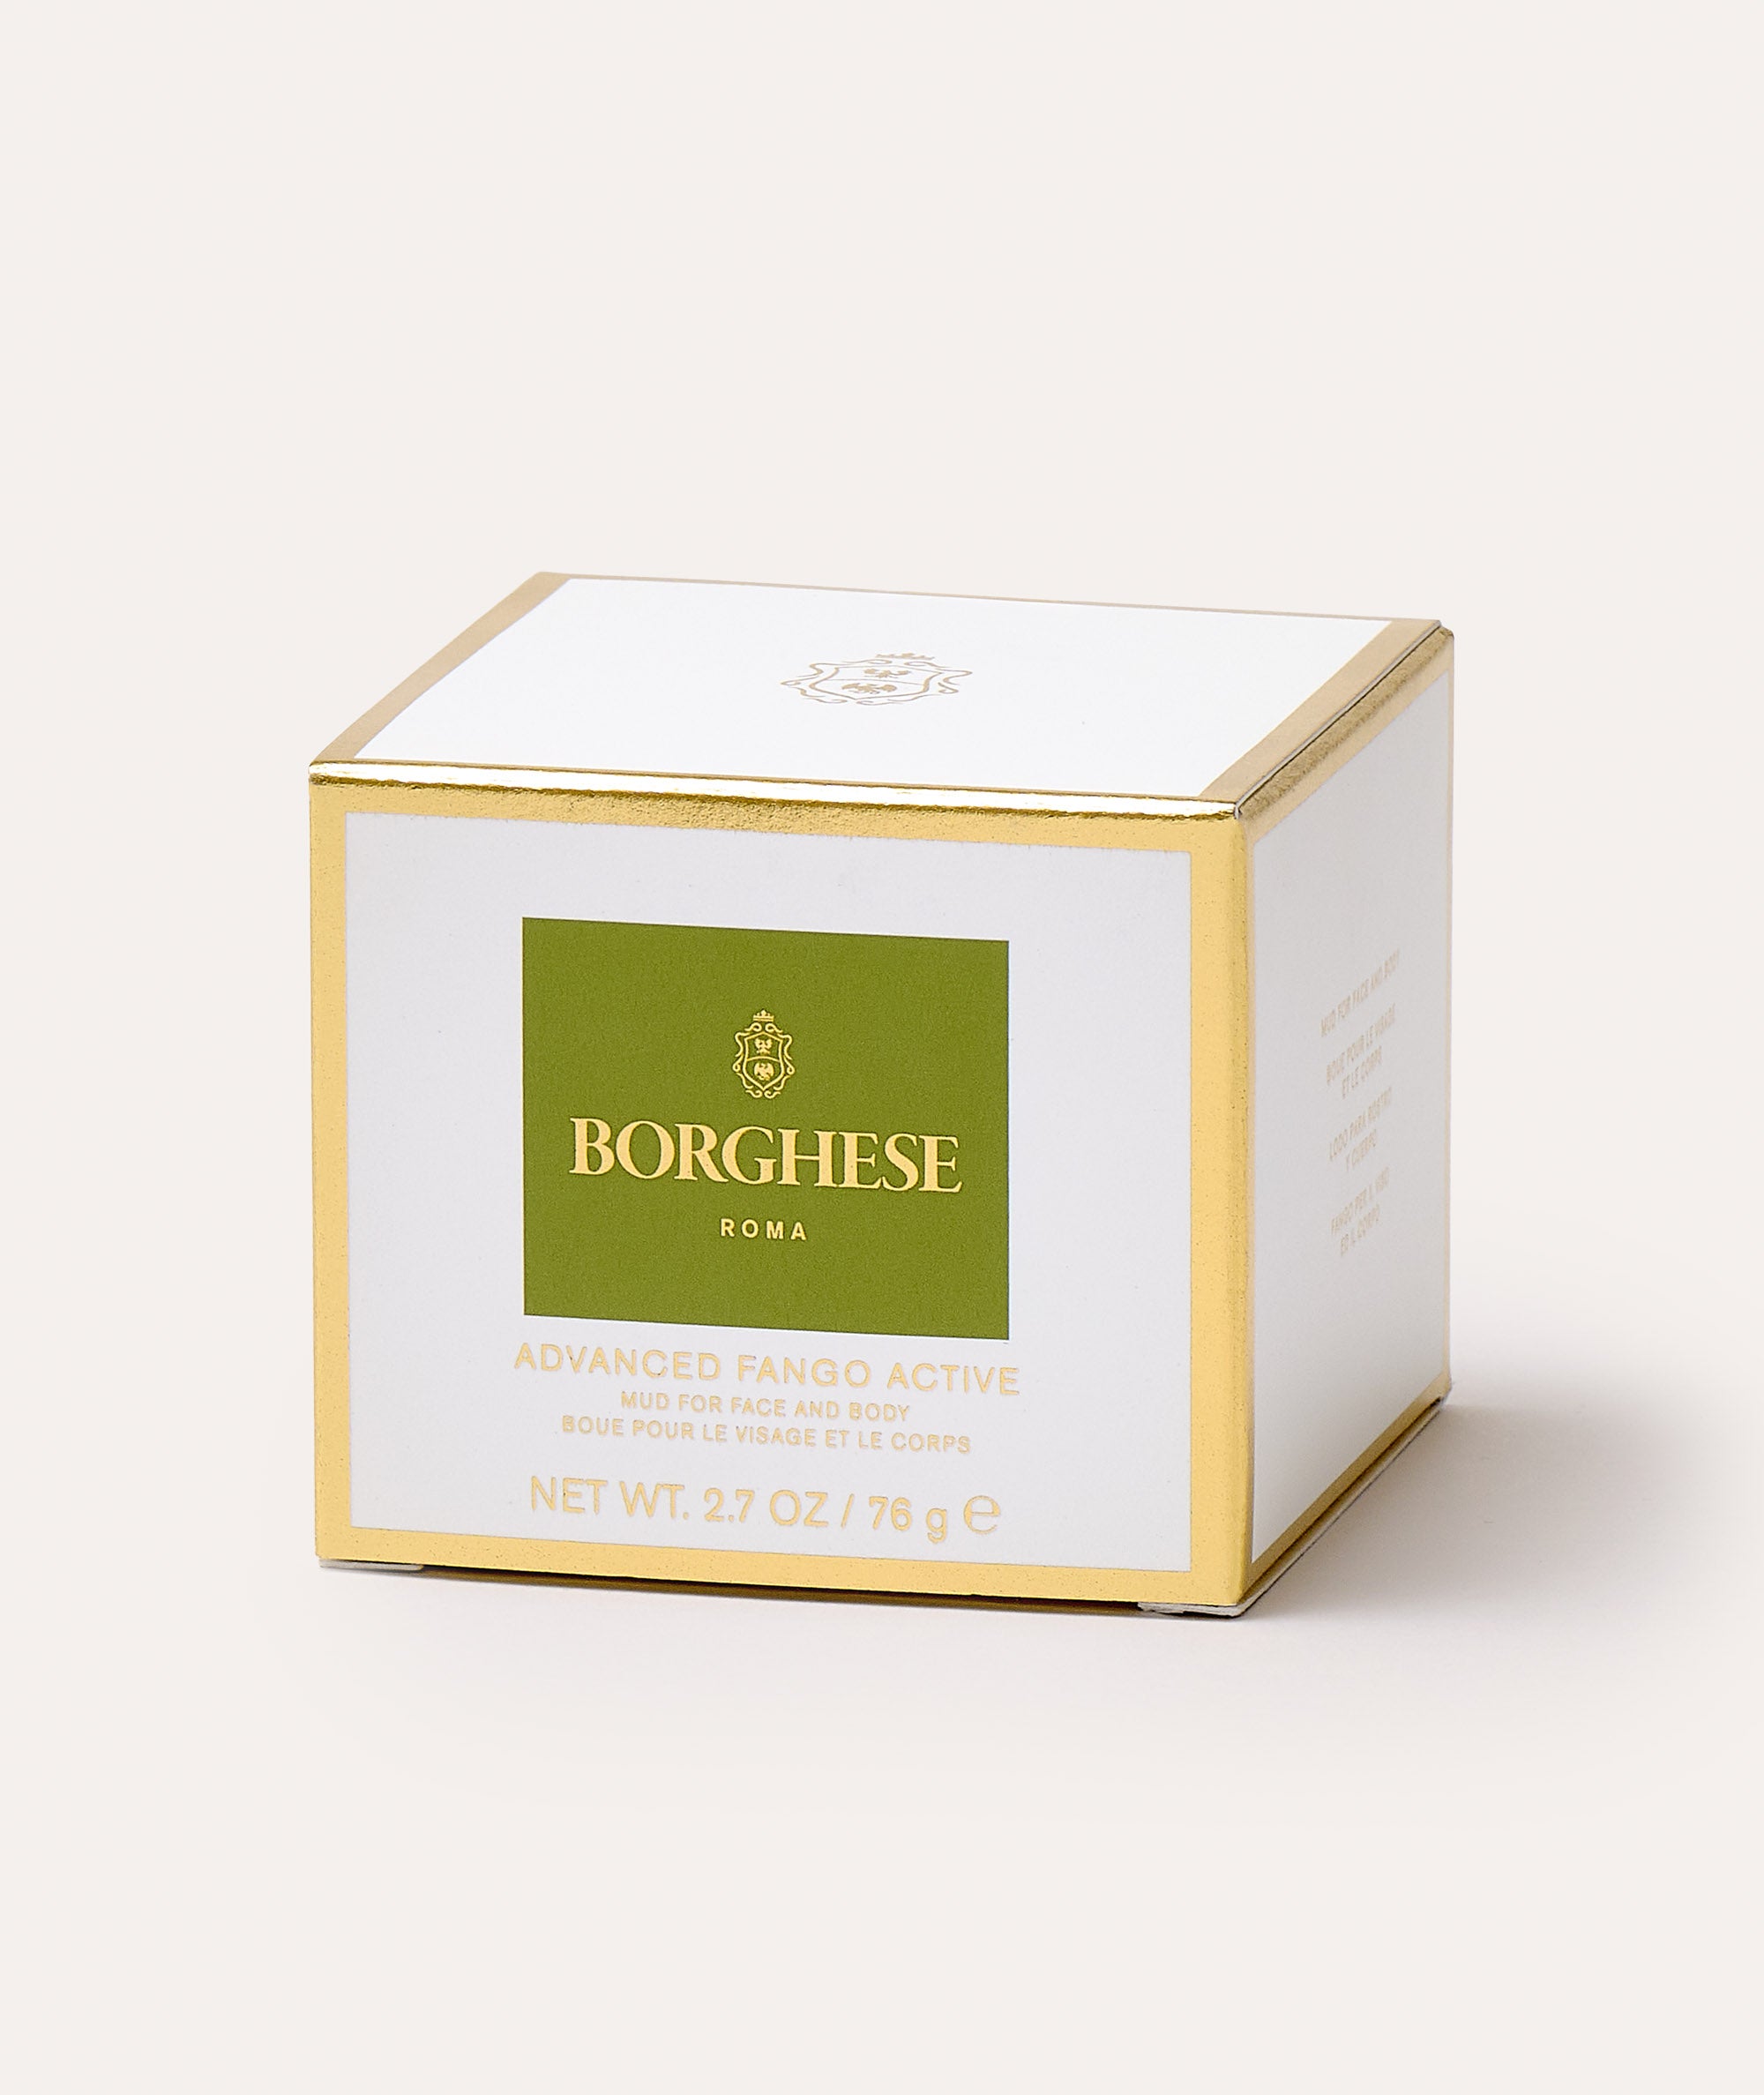 This is a picture of the Borghese Advanced Fango Active Purifying Mud Mask in a box